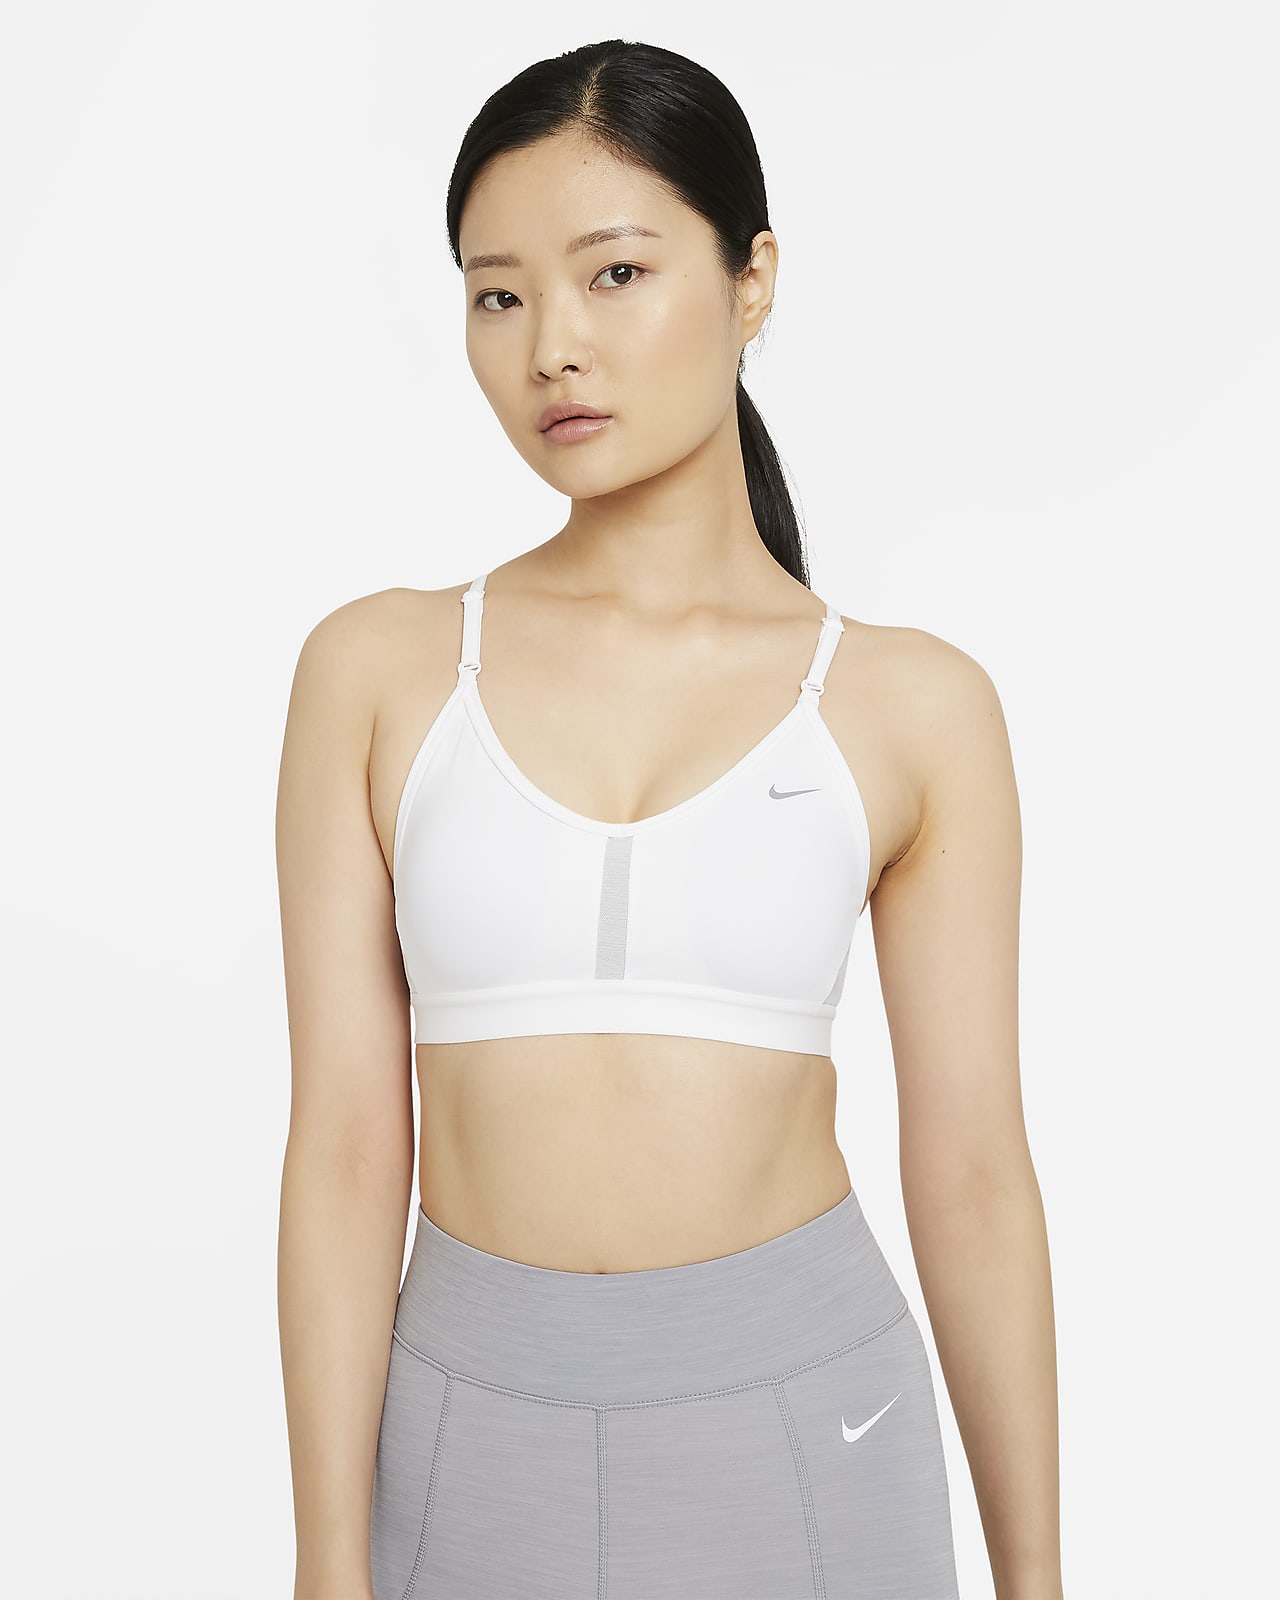 https://static.nike.com/a/images/t_PDP_1280_v1/f_auto,q_auto:eco/126a4647-2aad-484b-9fd6-275a42463250/indy-womens-light-support-padded-v-neck-sports-bra-ztRq7H.png